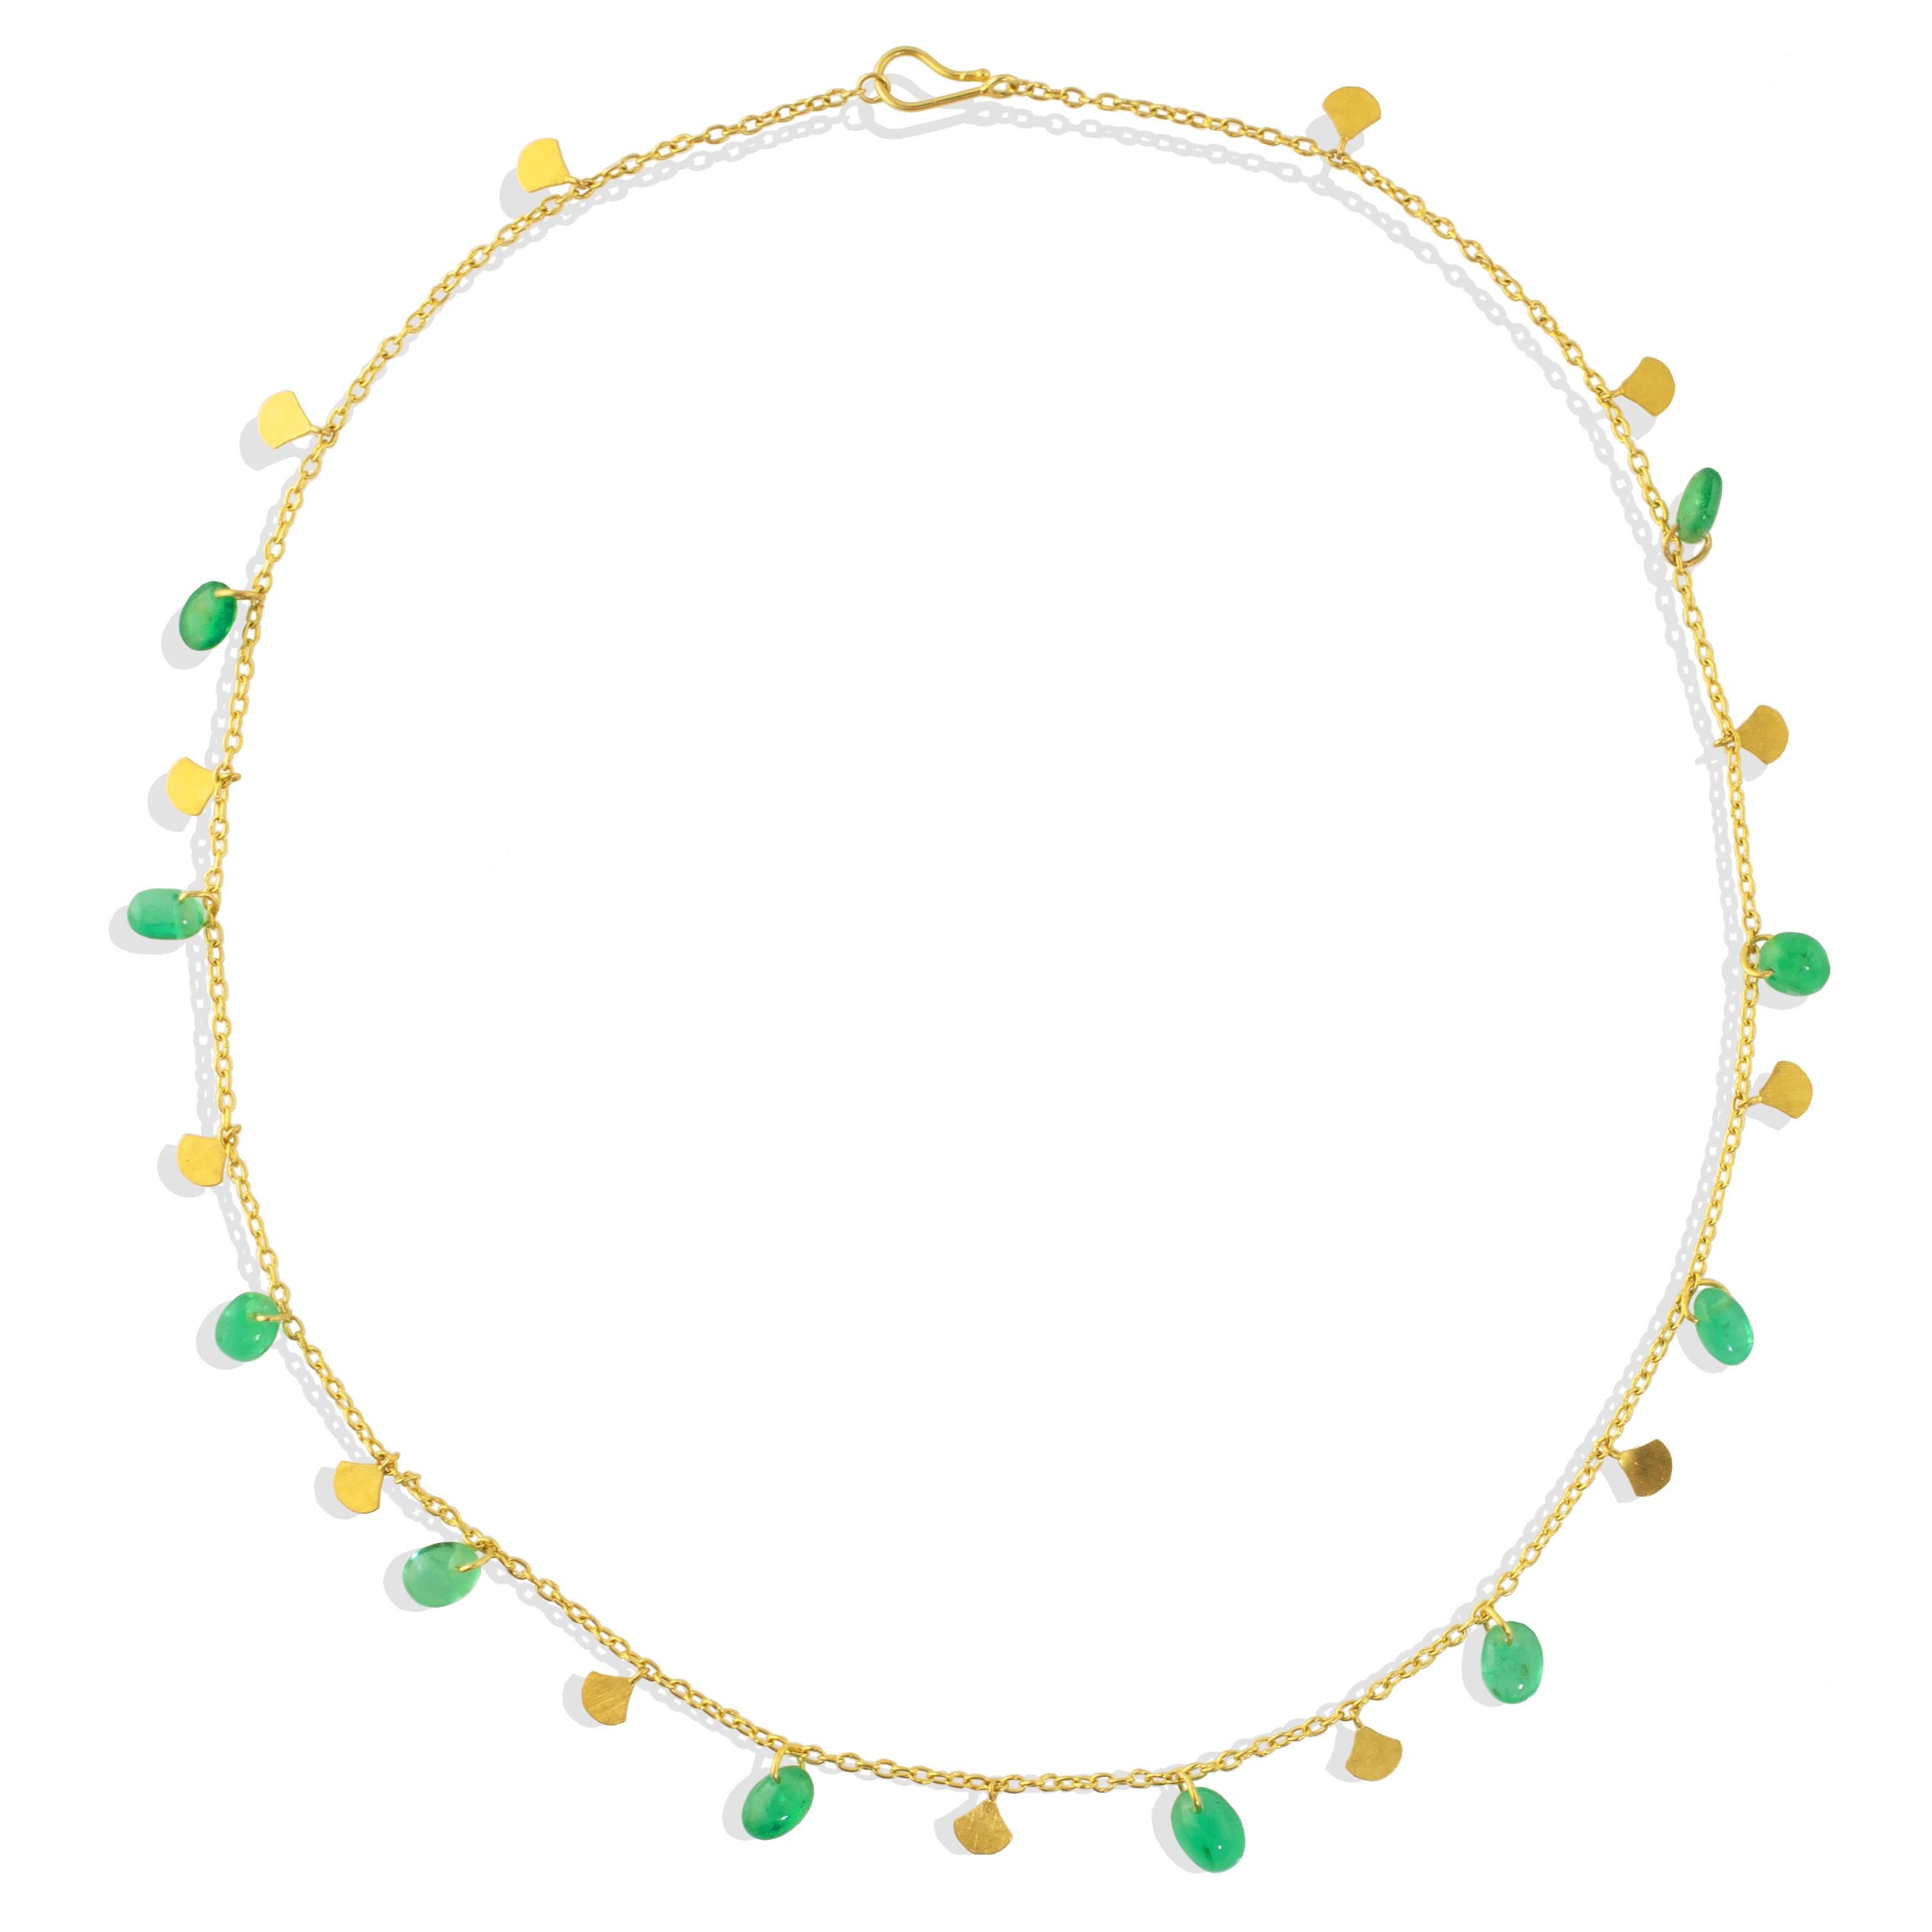 A charming, delicate necklace featuring Emerald pebbles  and matching 22k gold sequin charms.   Featuring 12.5carats of Columbian Emeralds  (approx. 8mm x 6mm) and matching gold sequins that decorate a 22k gold chain with a hook closure.  16.5